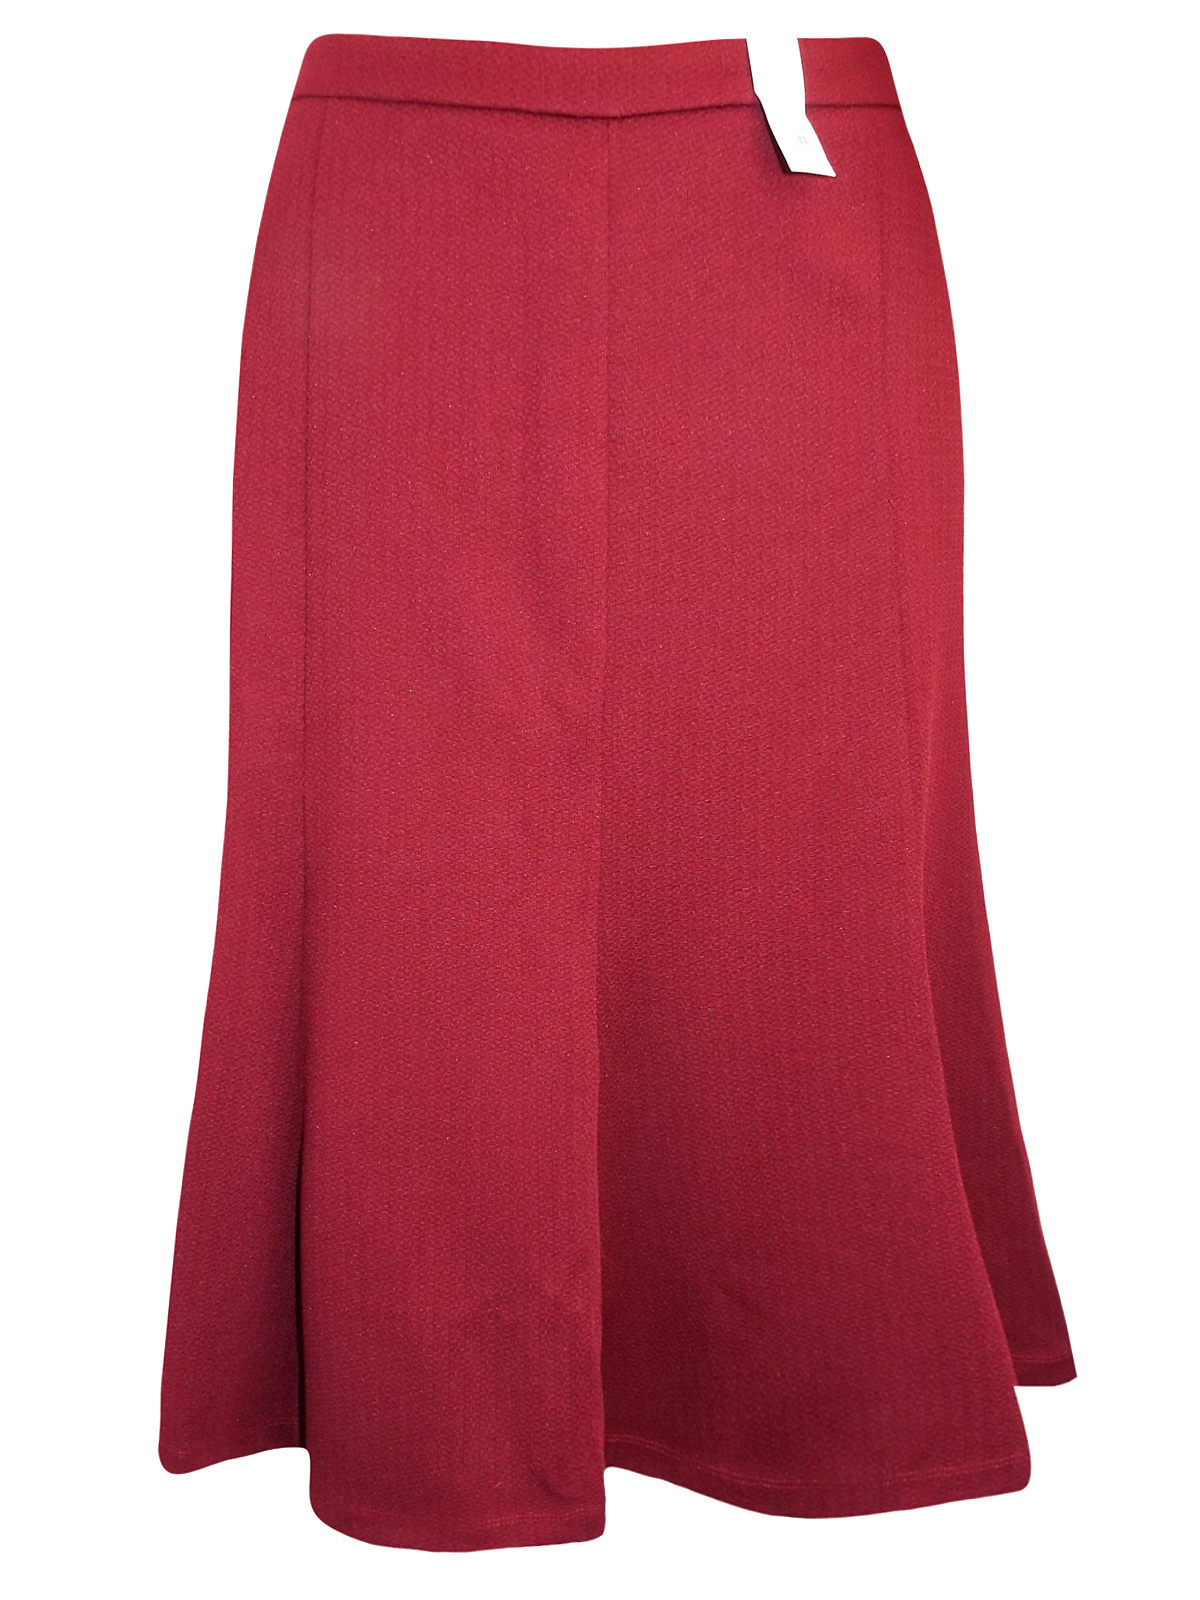 3vans RED Pull On Panelled A-Line Skirt - Plus Size 18 to 26